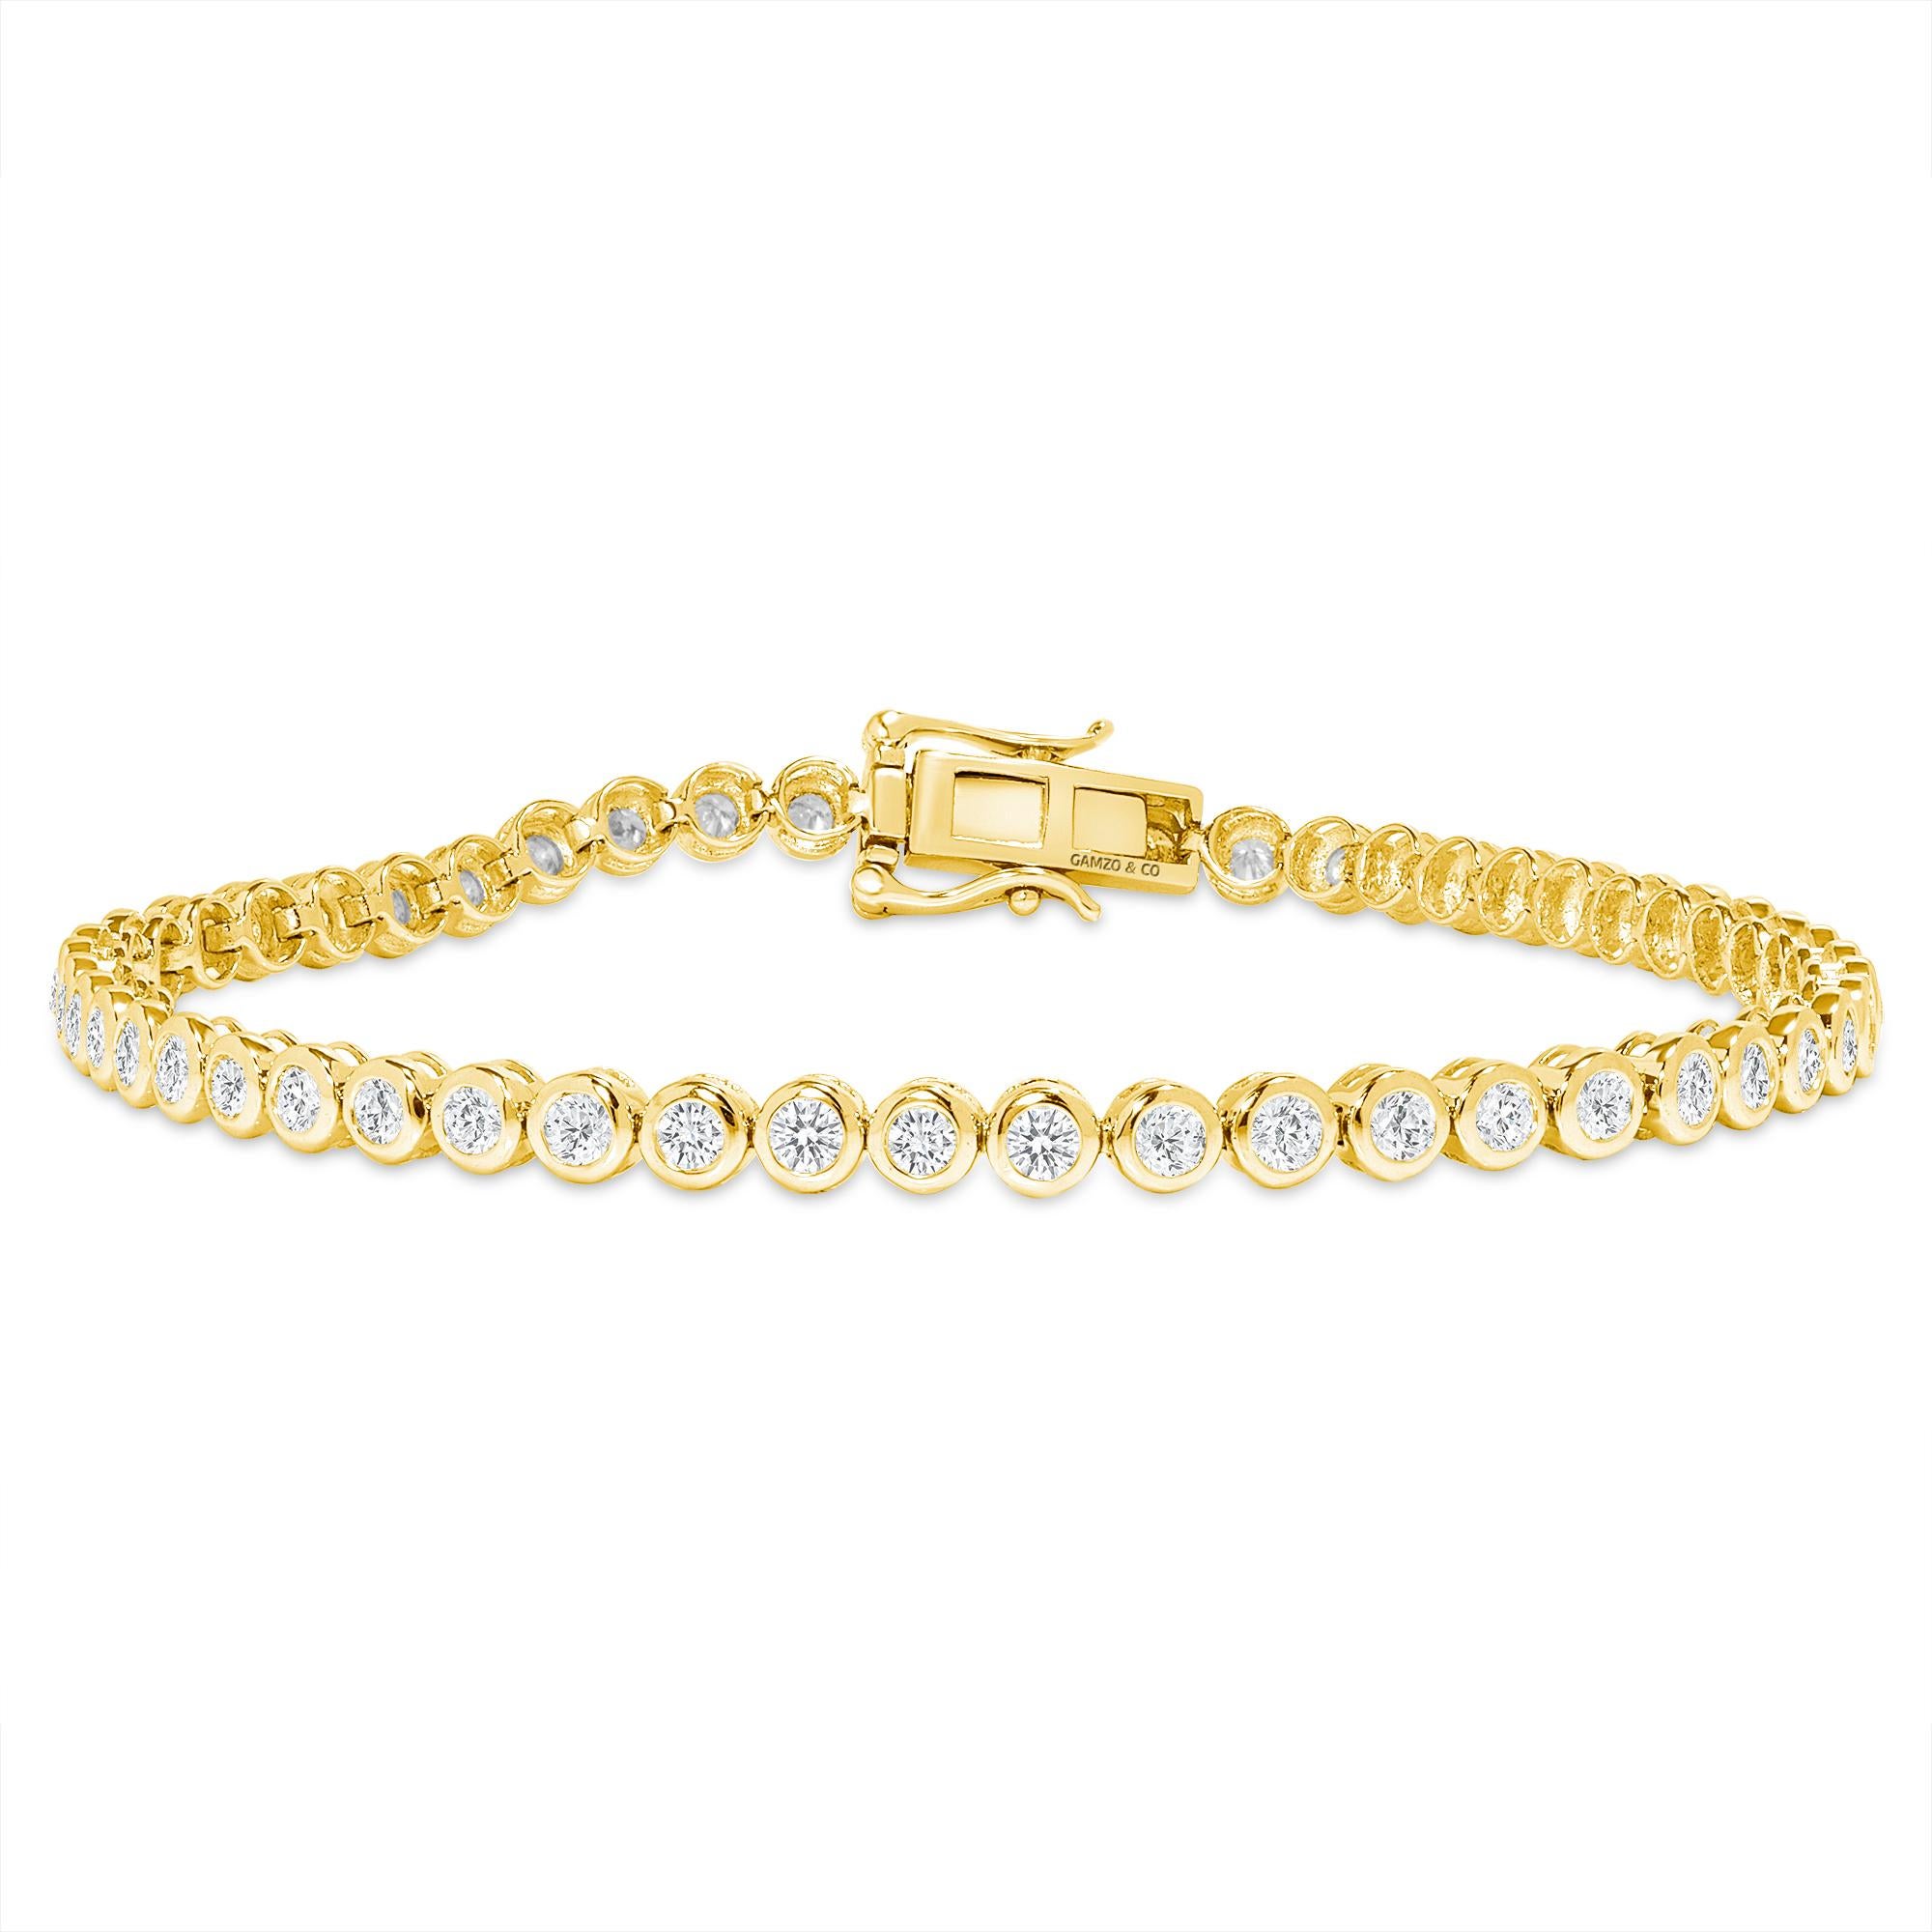 These beautiful round diamonds dance around your wrist as they absorb light and attention.
Metal: 14k Gold
Diamond Cut: Round
Diamond Total Carats: 3ct
Diamond Clarity: VS
Diamond Color: F
Color: Yellow Gold
Bracelet Length: 7 Inches 
Included with